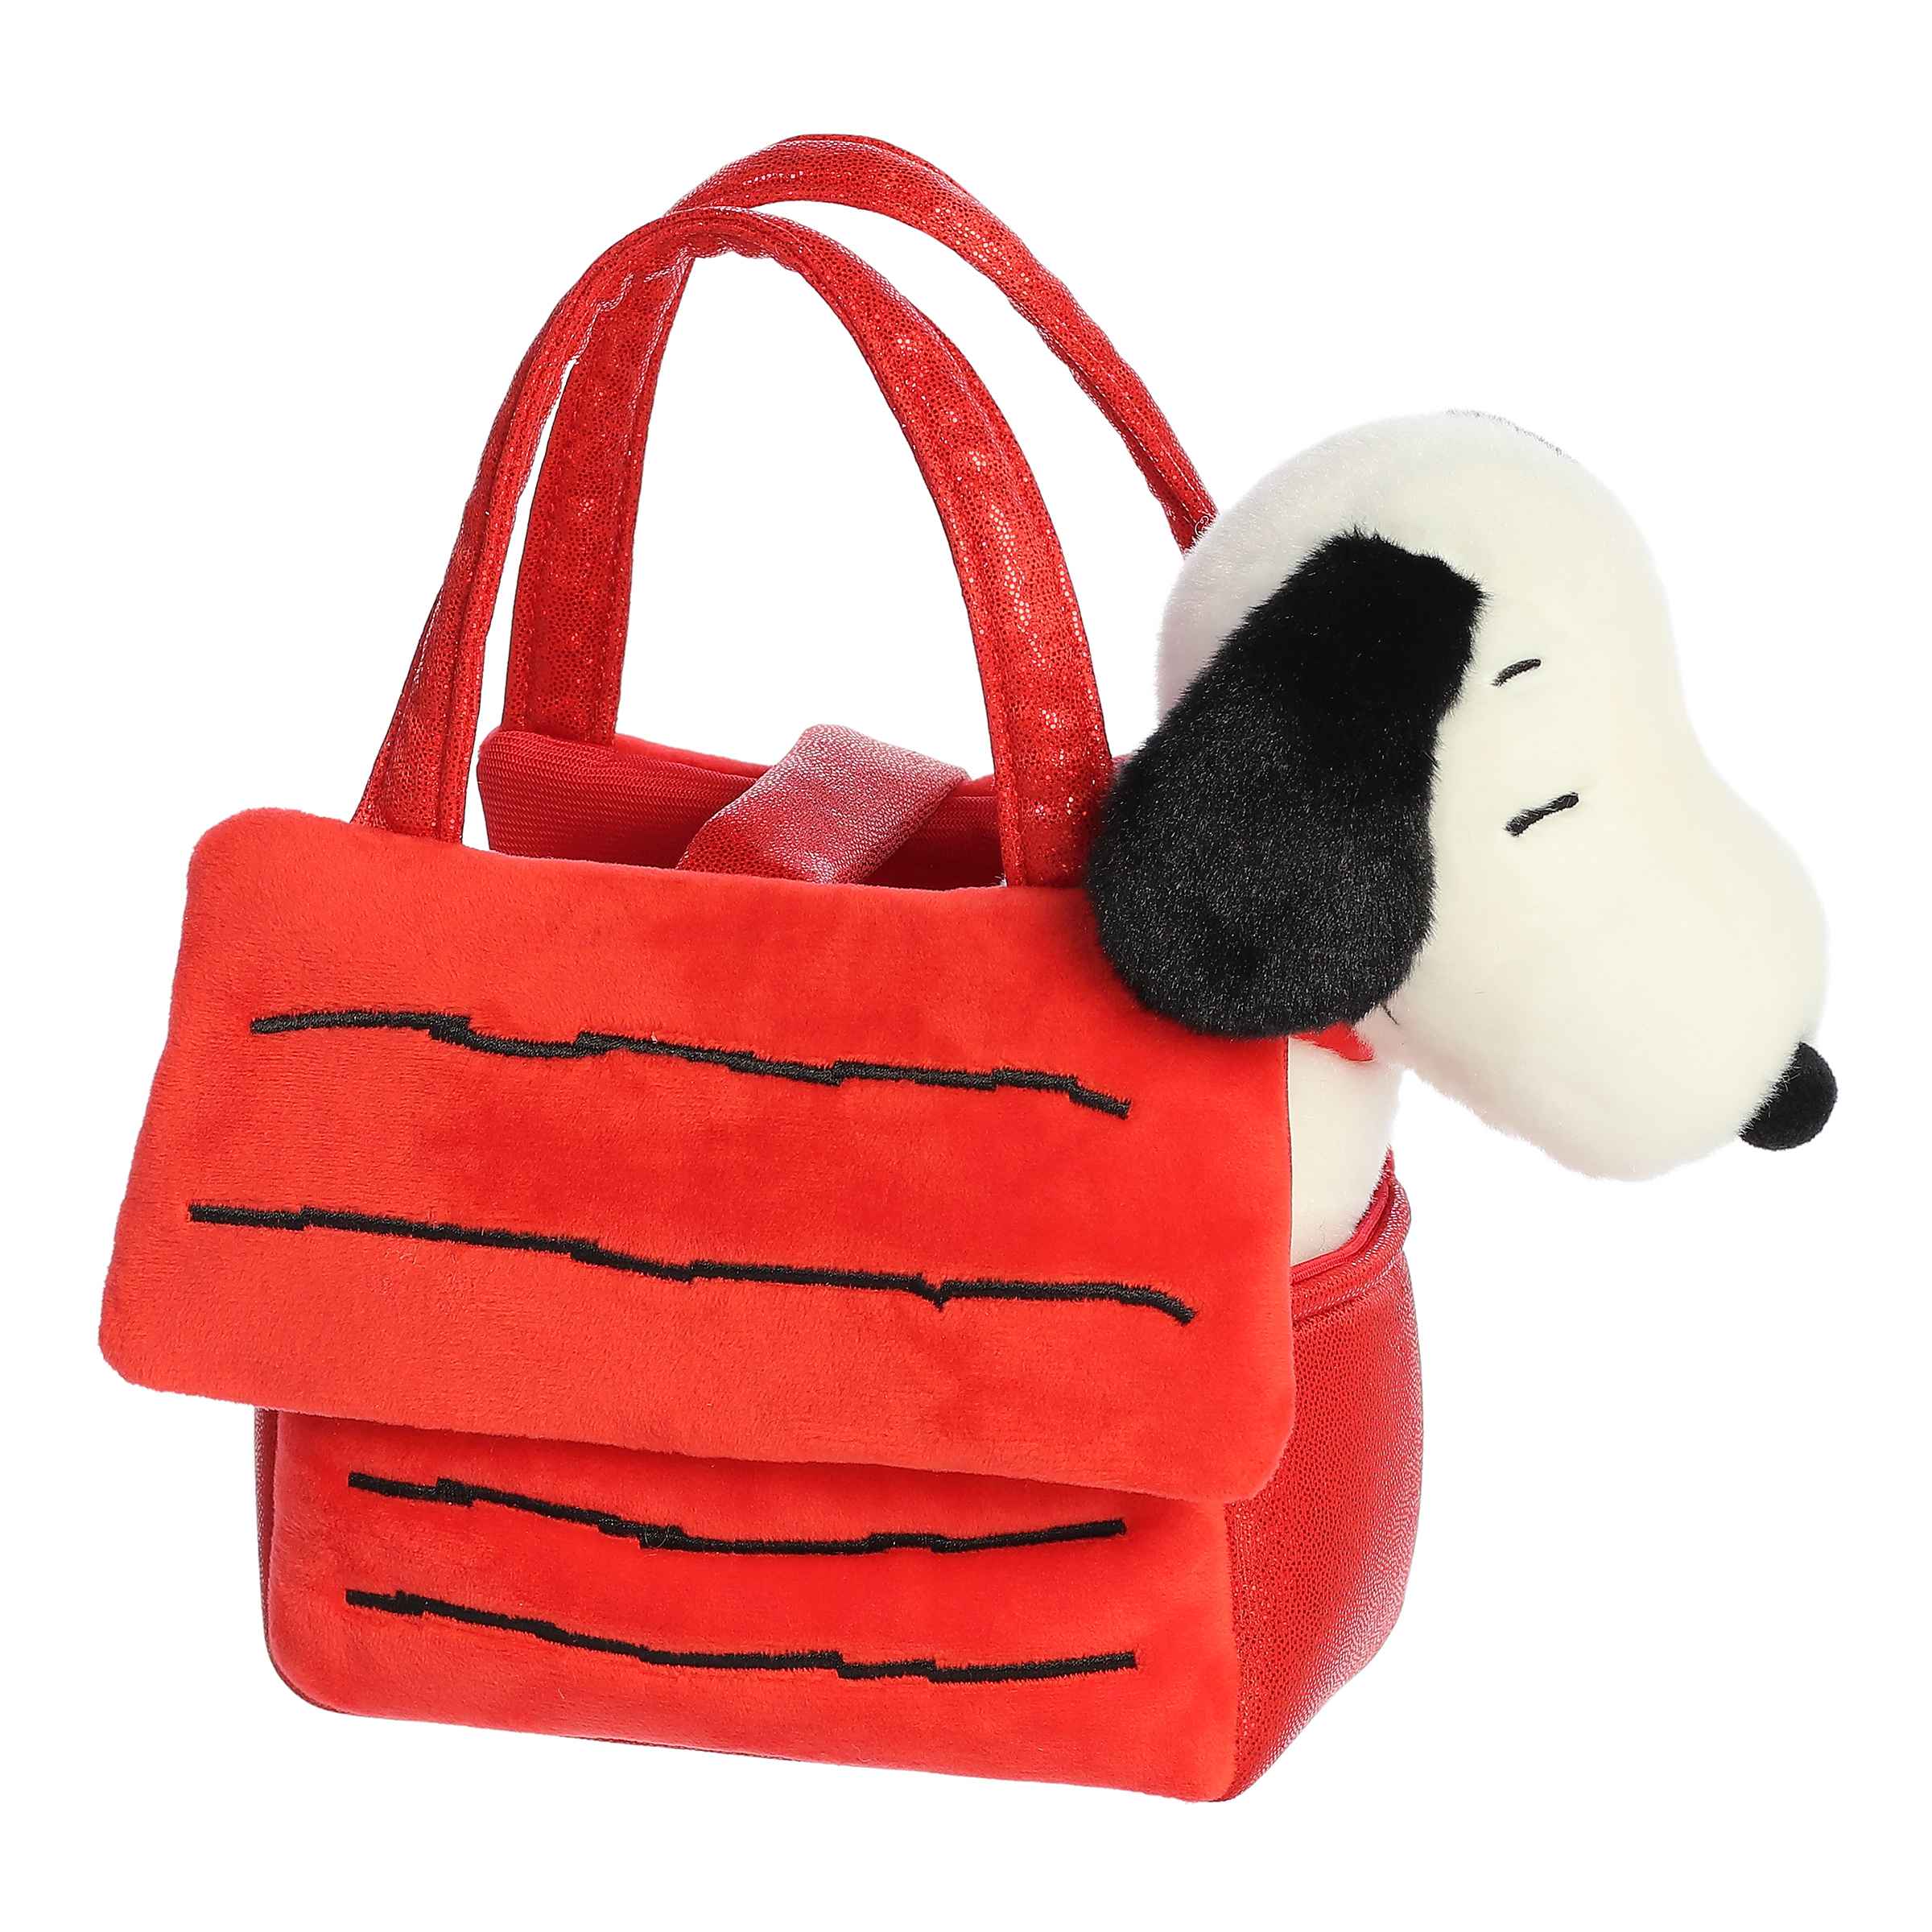 Snoopy's House by Fancy Pal, plush Snoopy in red doghouse carrier, interactive play